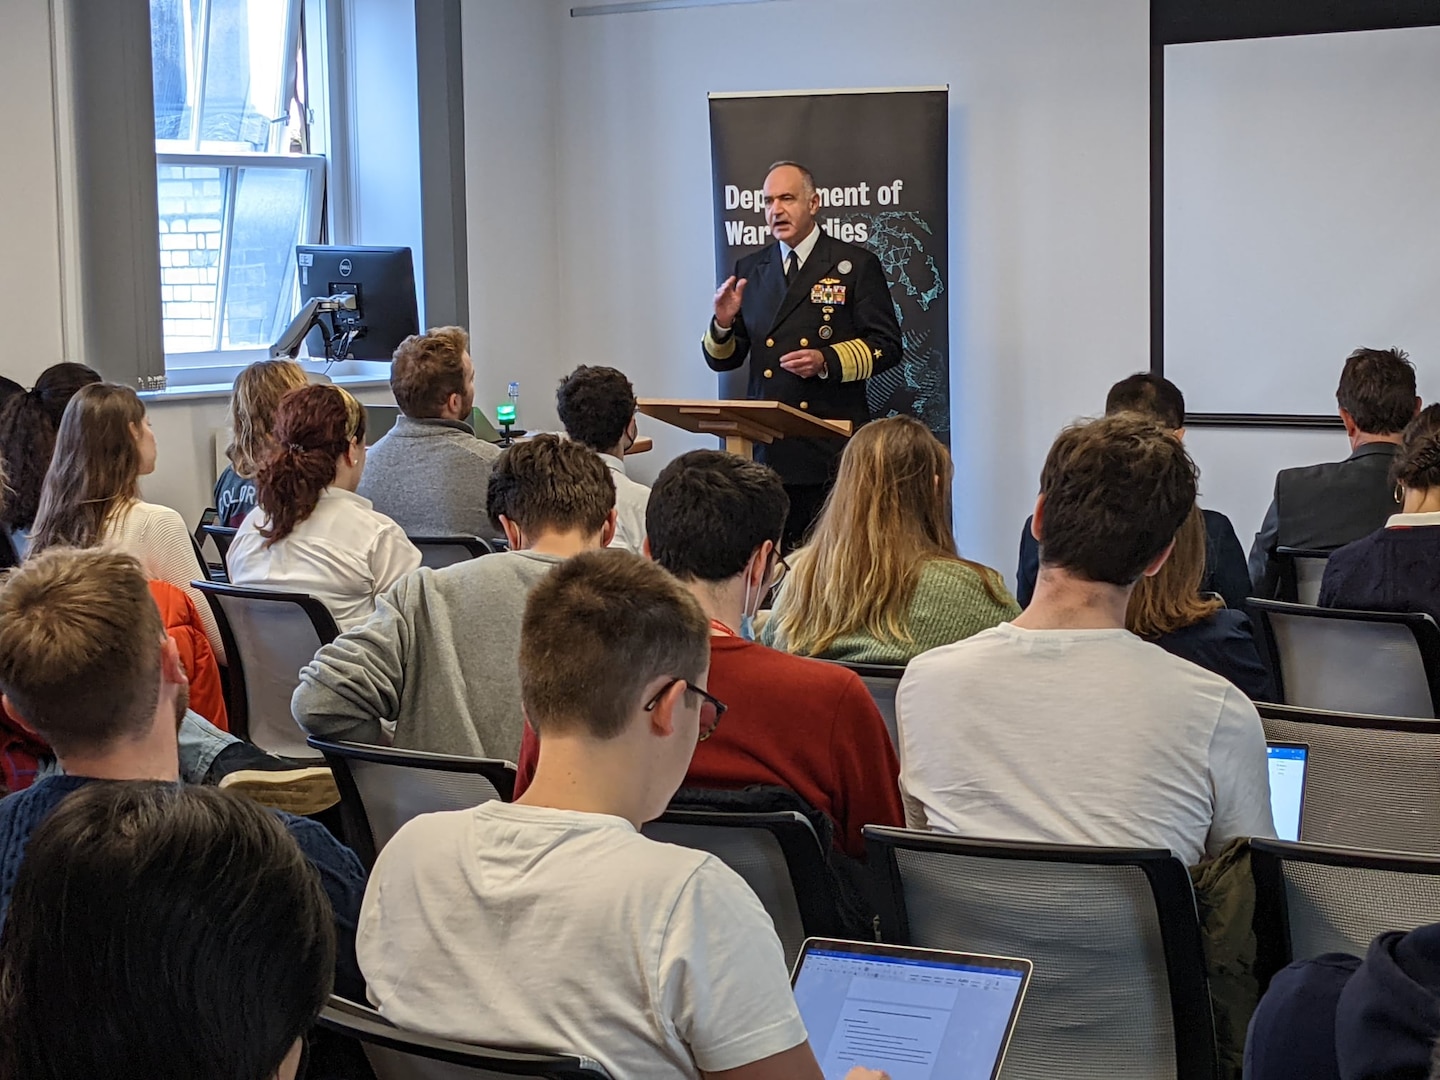 Adm. Richard met with students at King's College in London on Oct. 19, 2021. (Courtesy Photo)